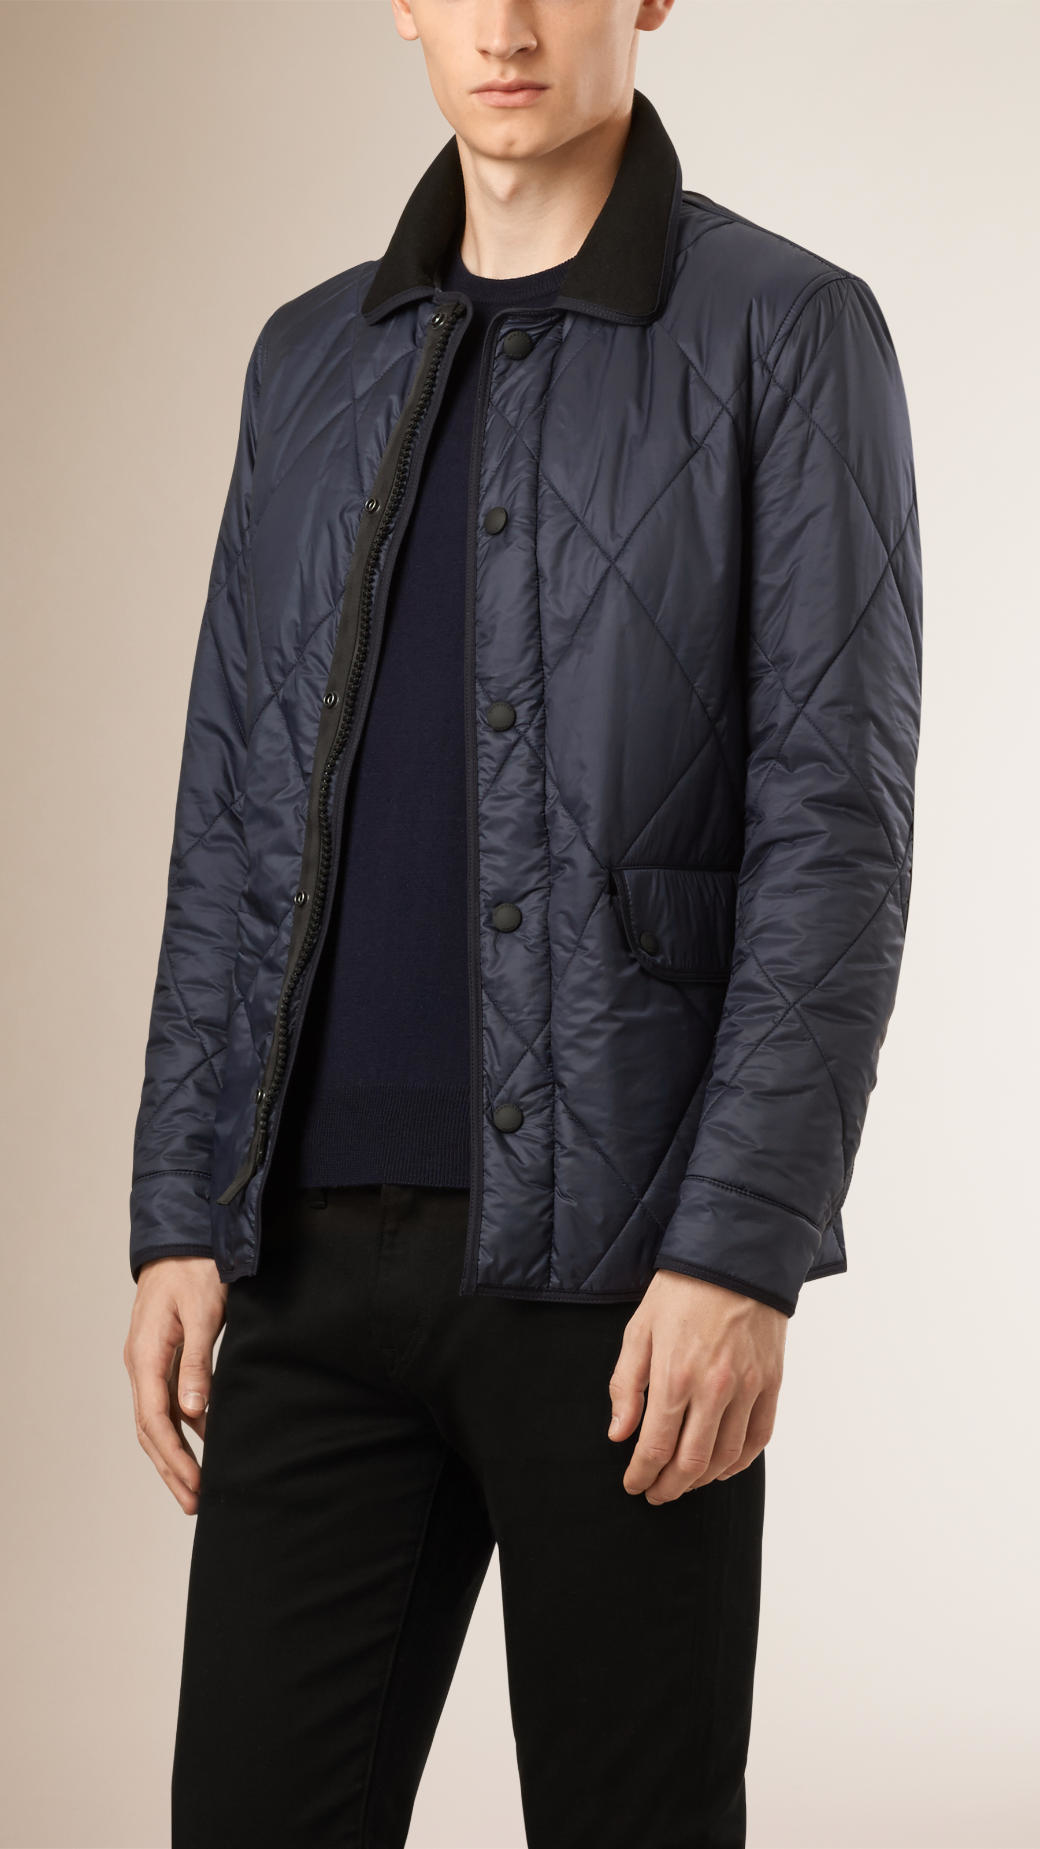 Burberry Diamond Quilted Jacket in Navy (Blue) for Men - Lyst